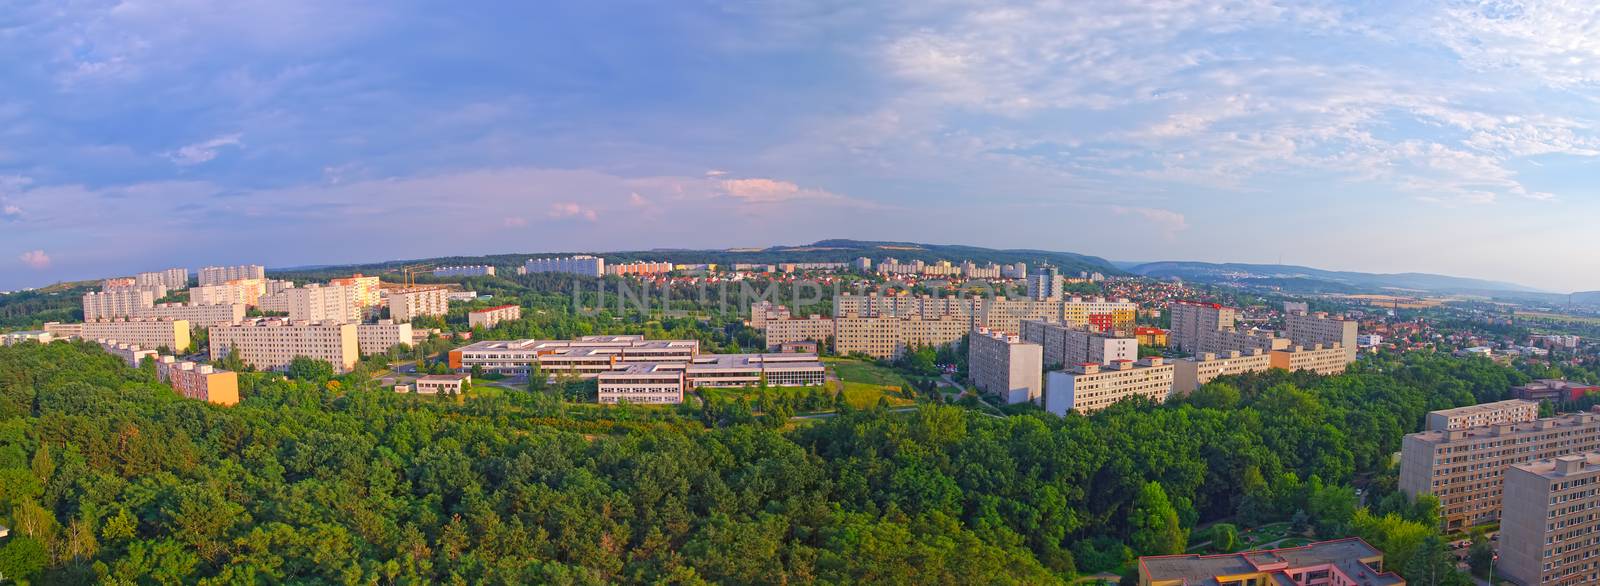 Aerial view of Prague suburb, residential green area